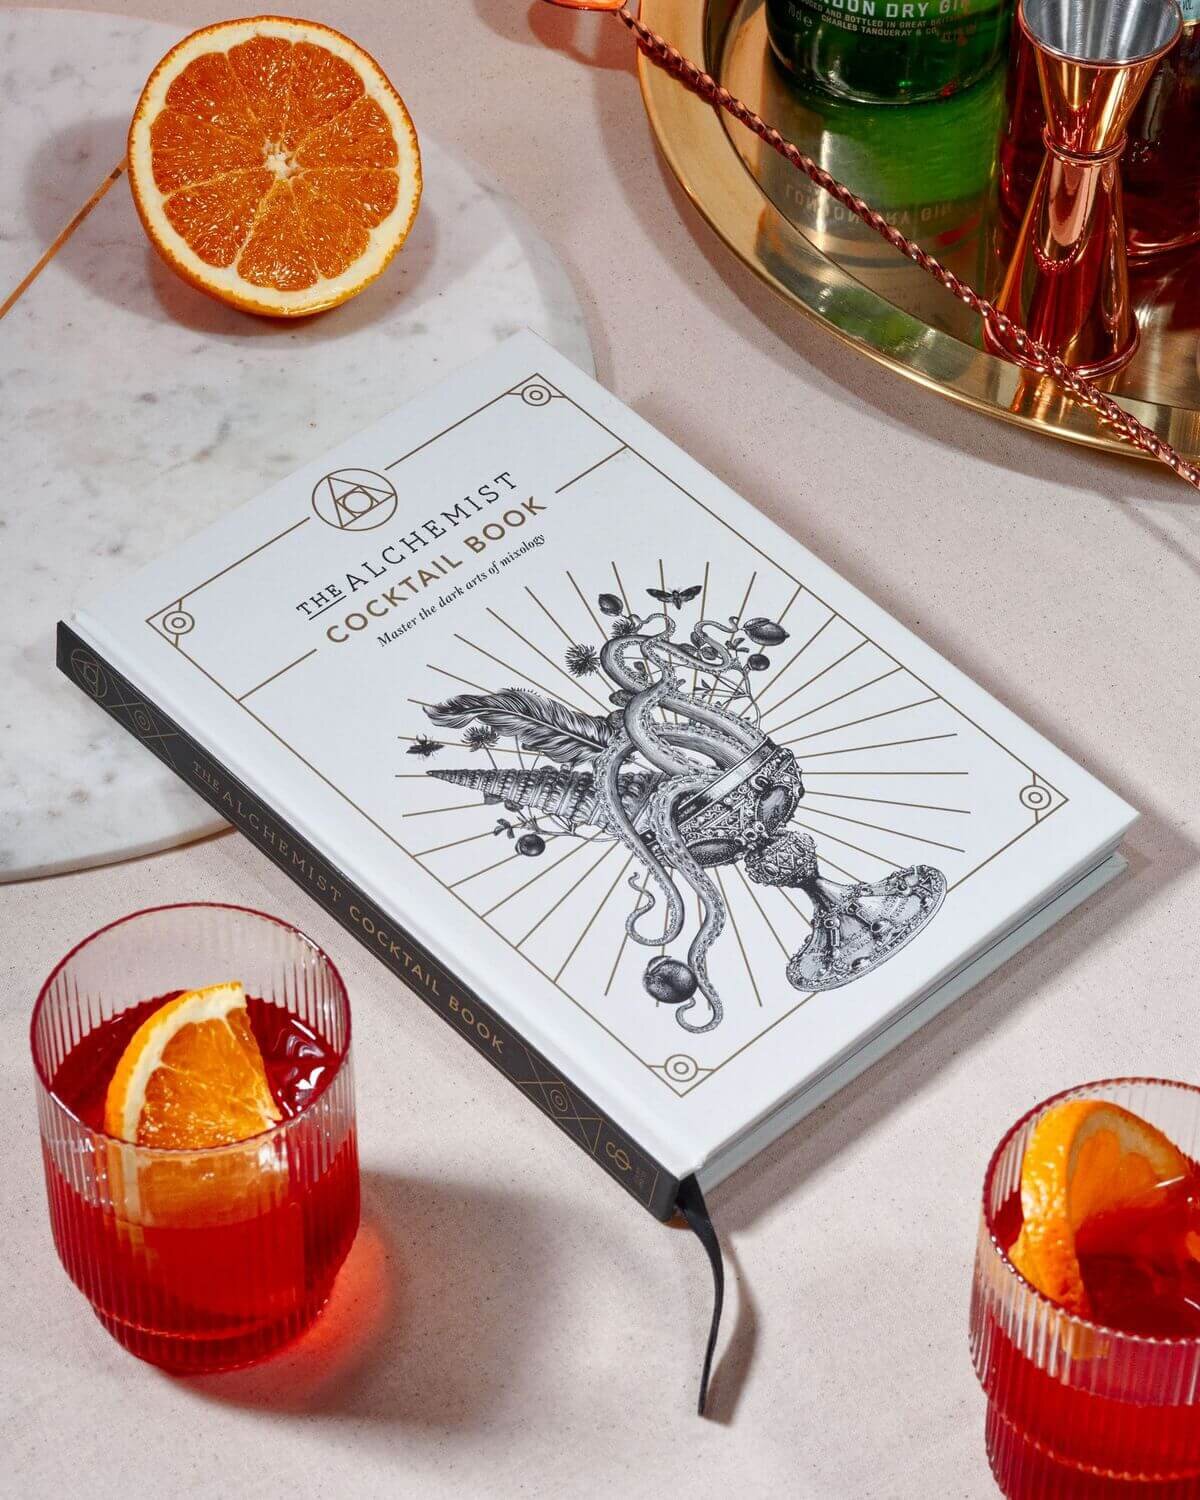 the alchemist cocktail book review